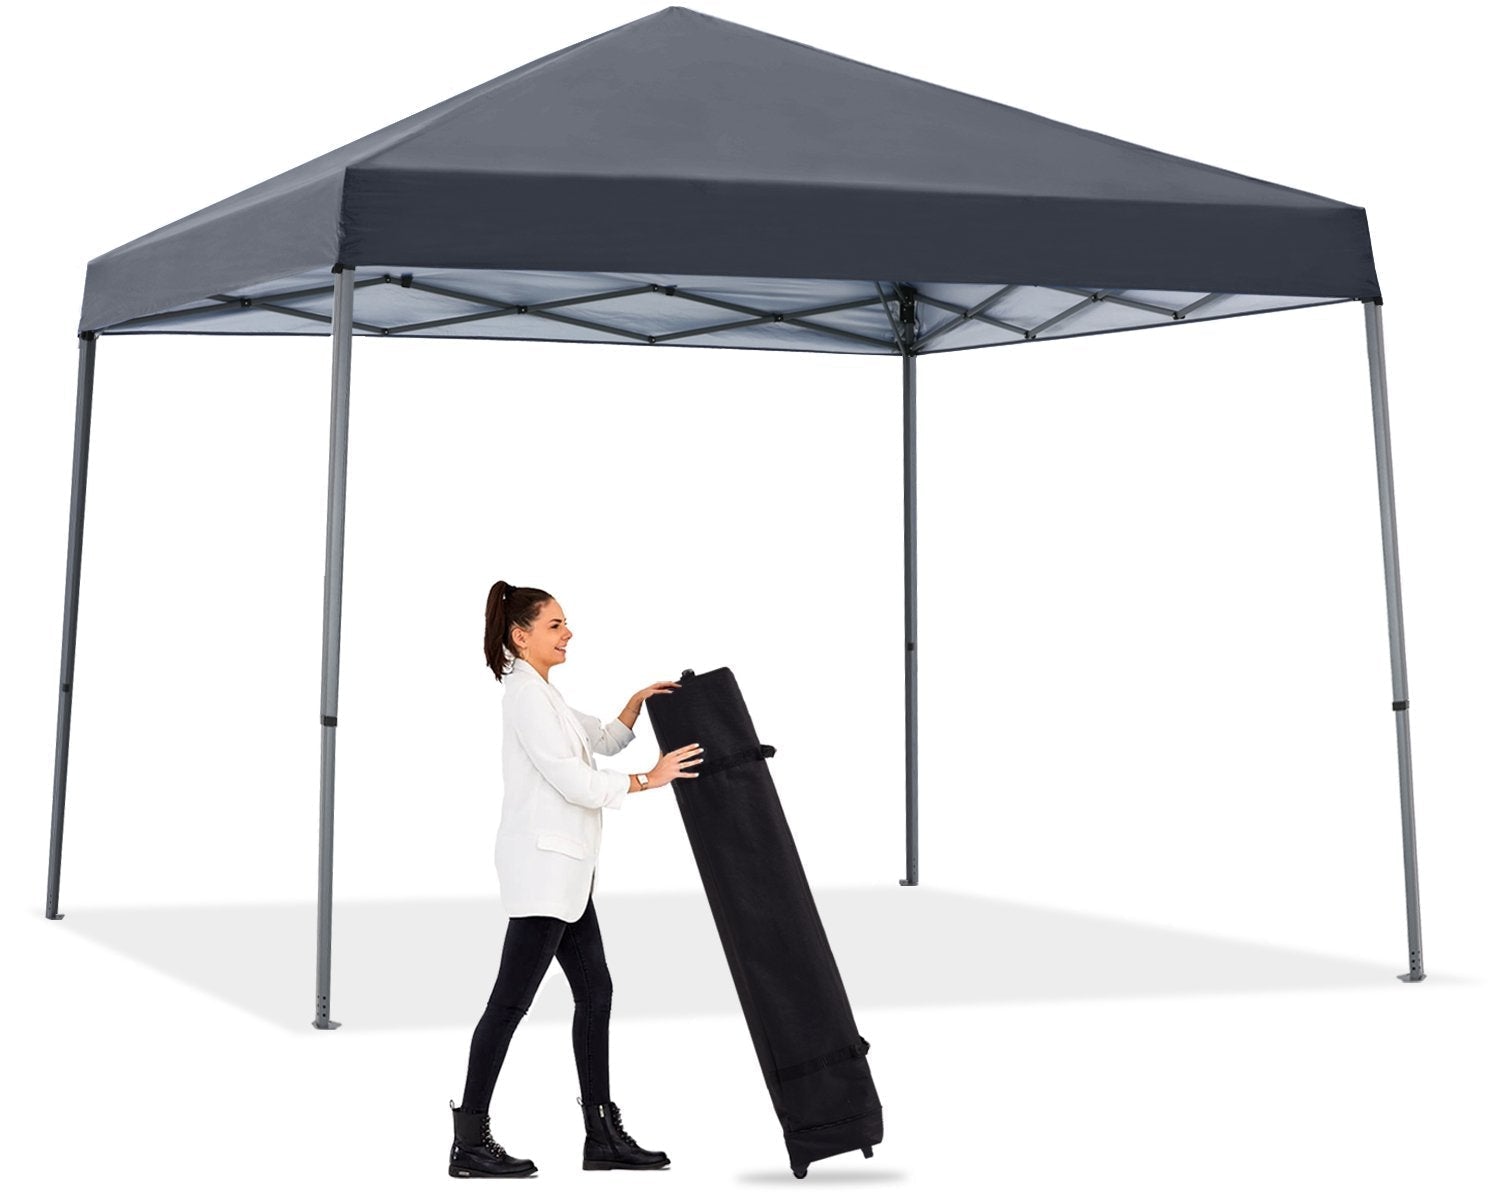 Stable Pop up Outdoor Canopy Tent - ABC-CANOPY